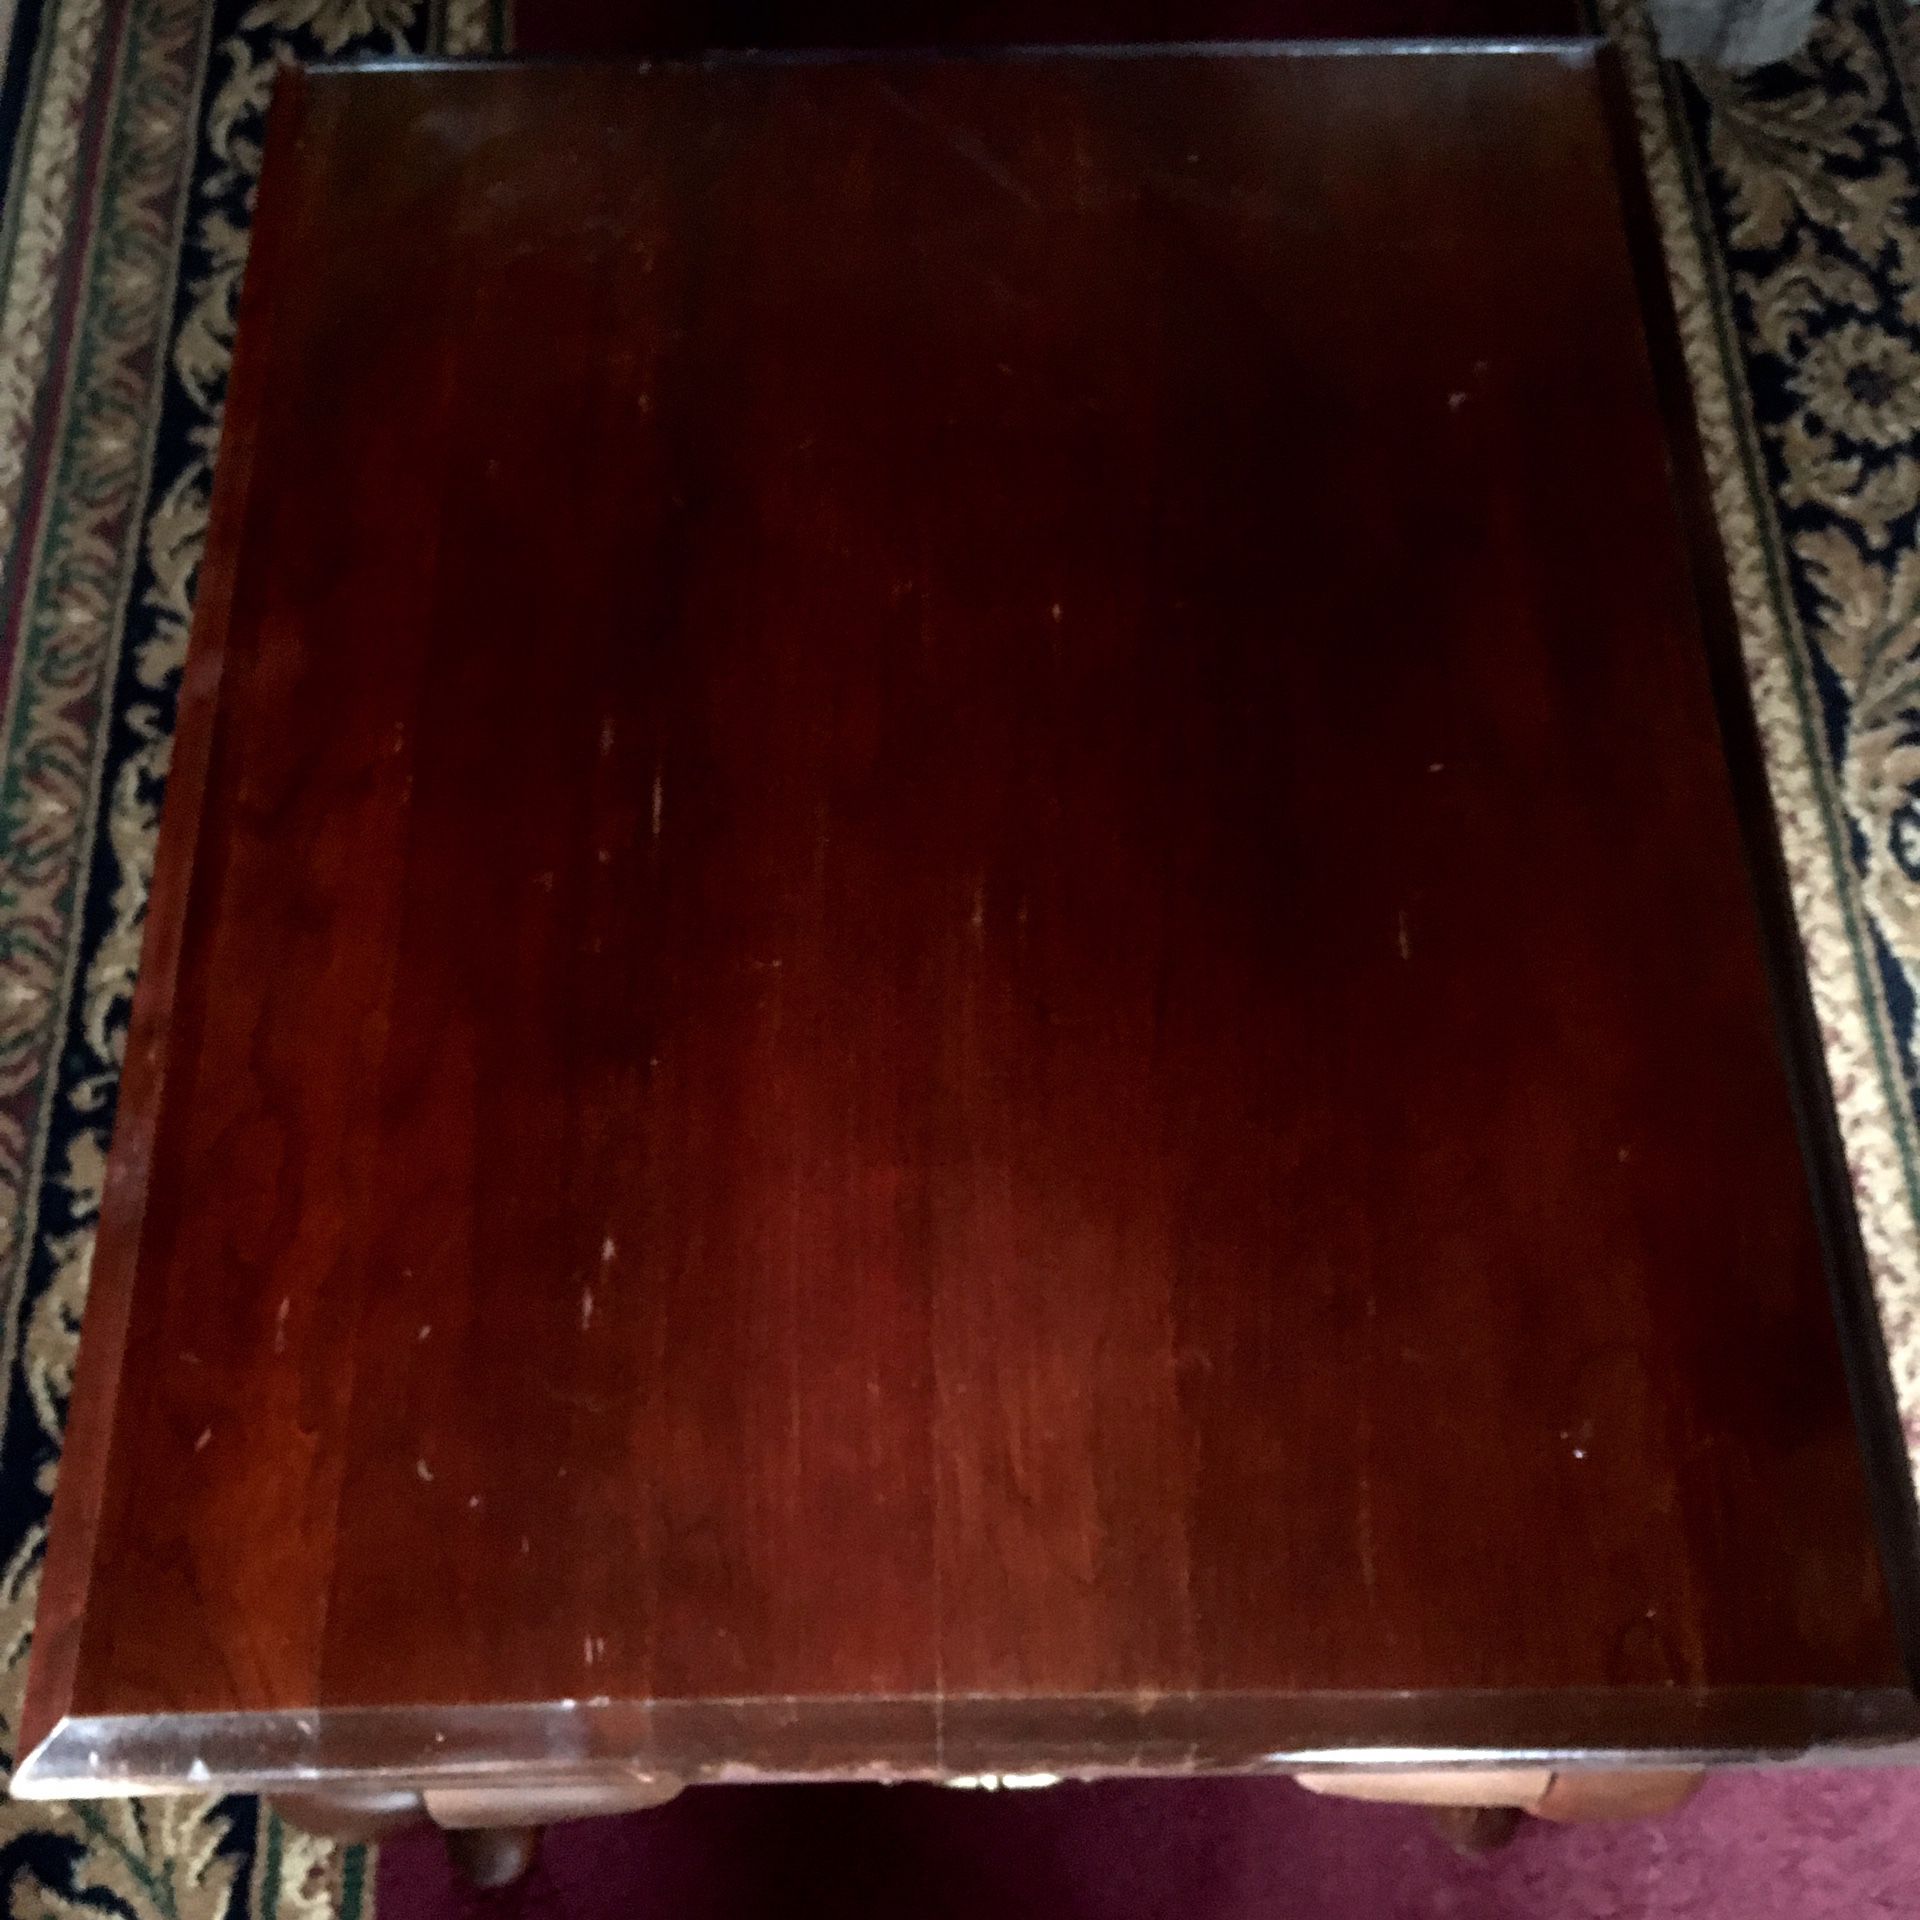 Cherry end table